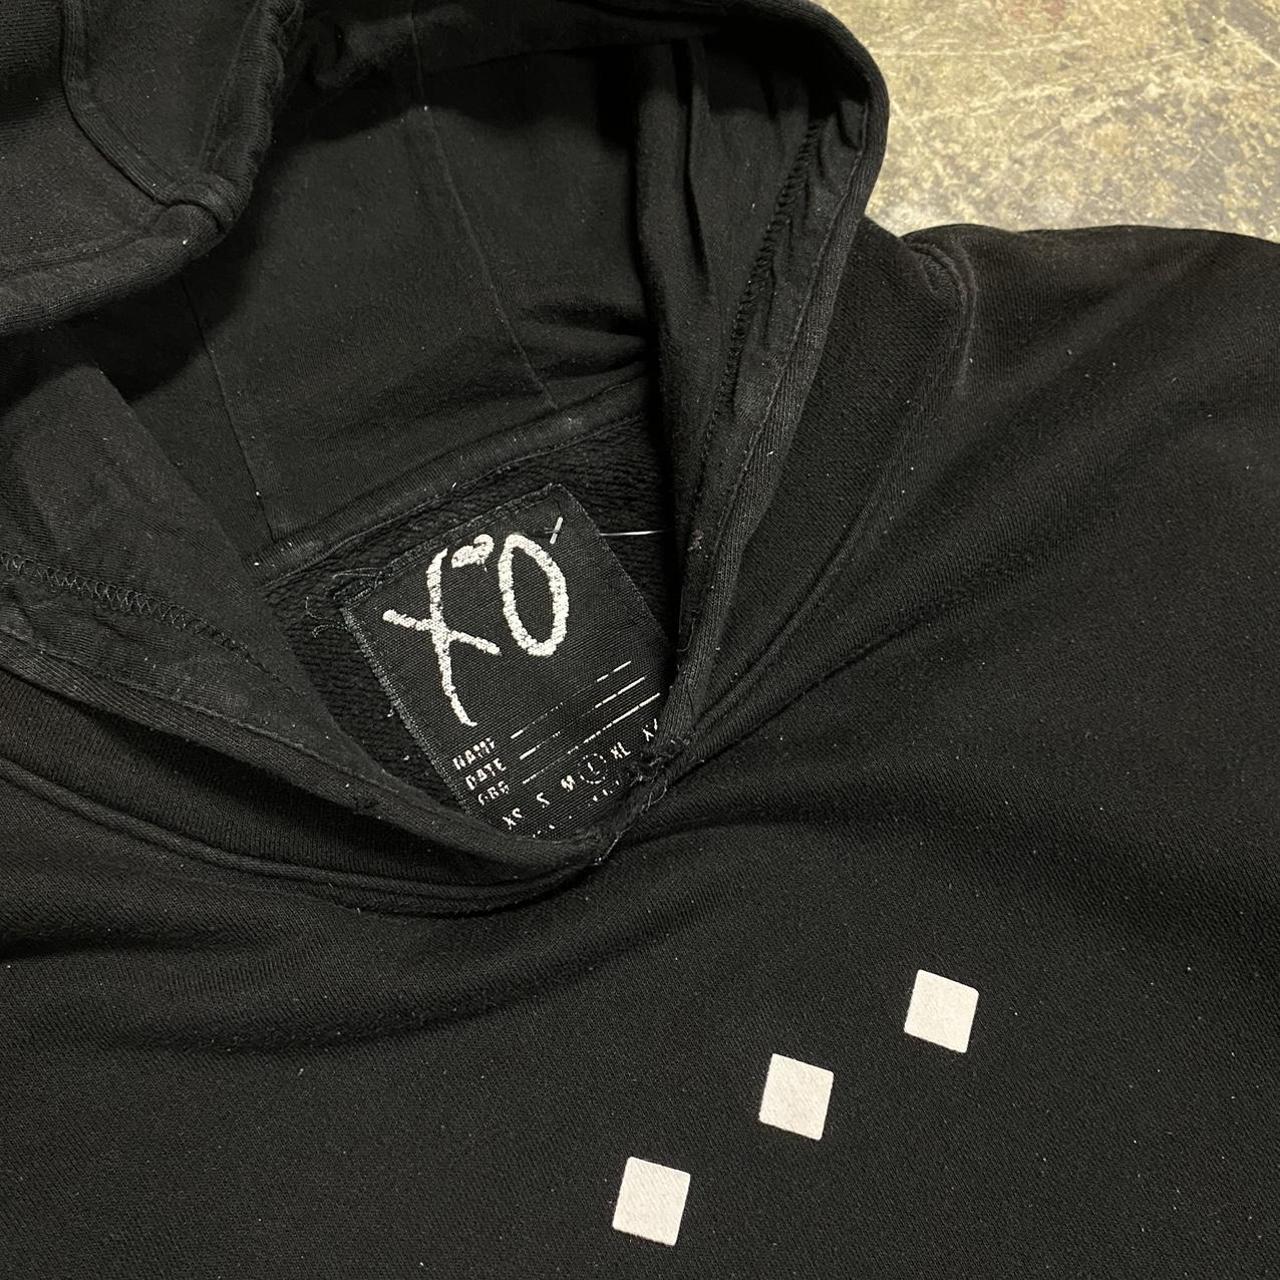 The Weeknd Trilogy 5 Year Anniversary Hoodie Size M LIMITED RELEASE